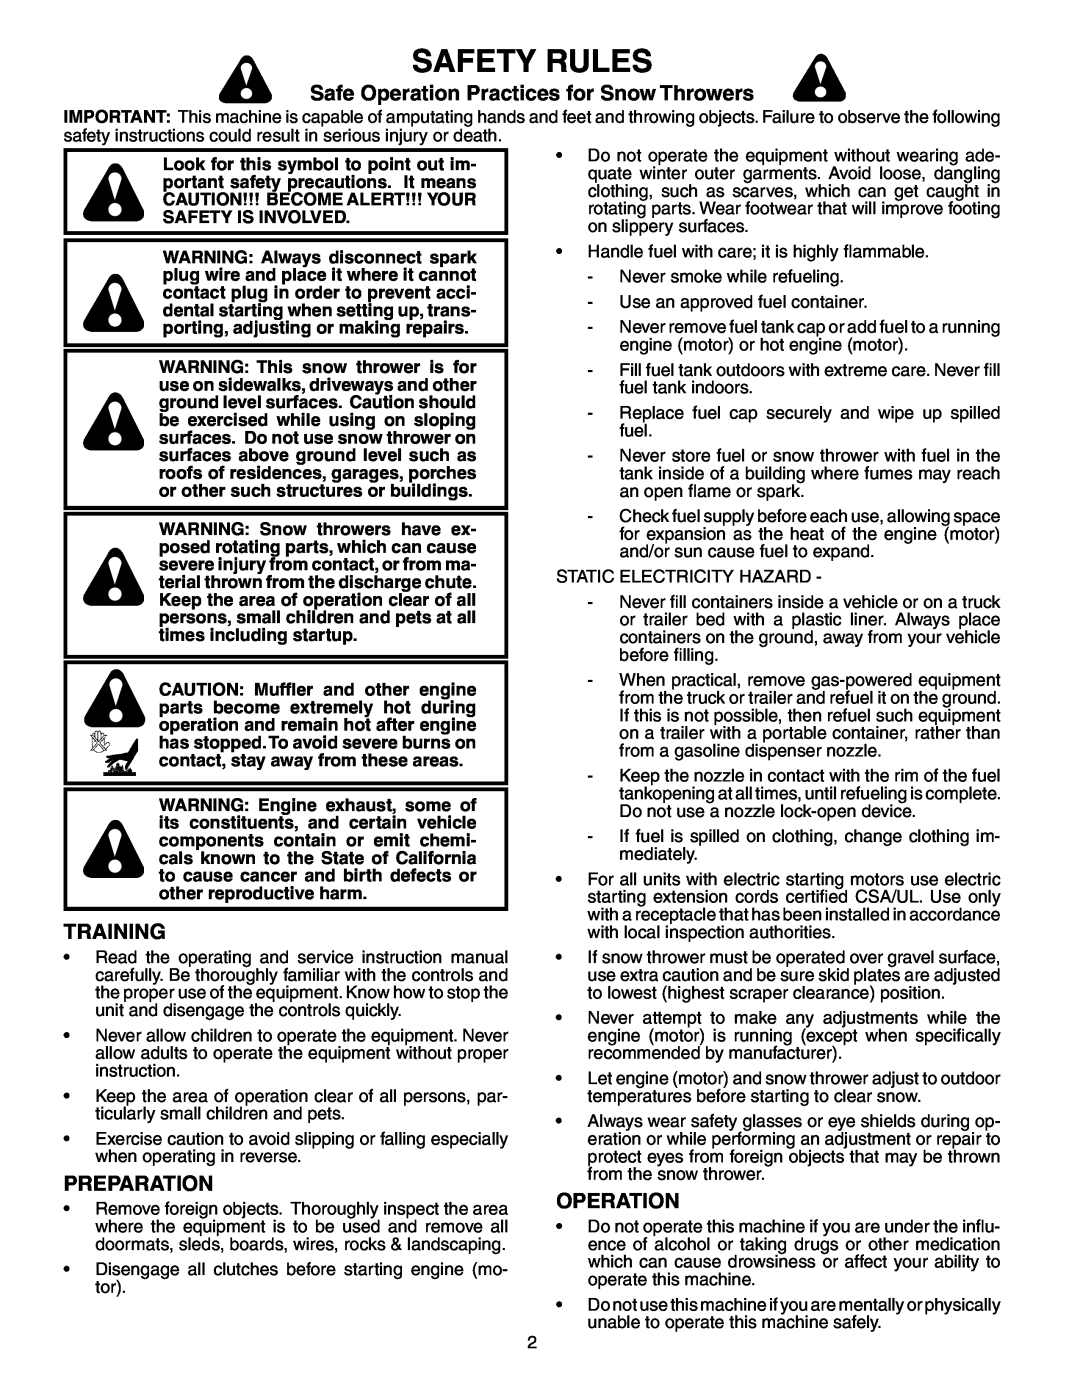 Poulan PR10527ESA owner manual Safety Rules, Safe Operation Practices for Snow Throwers, Training, Preparation 